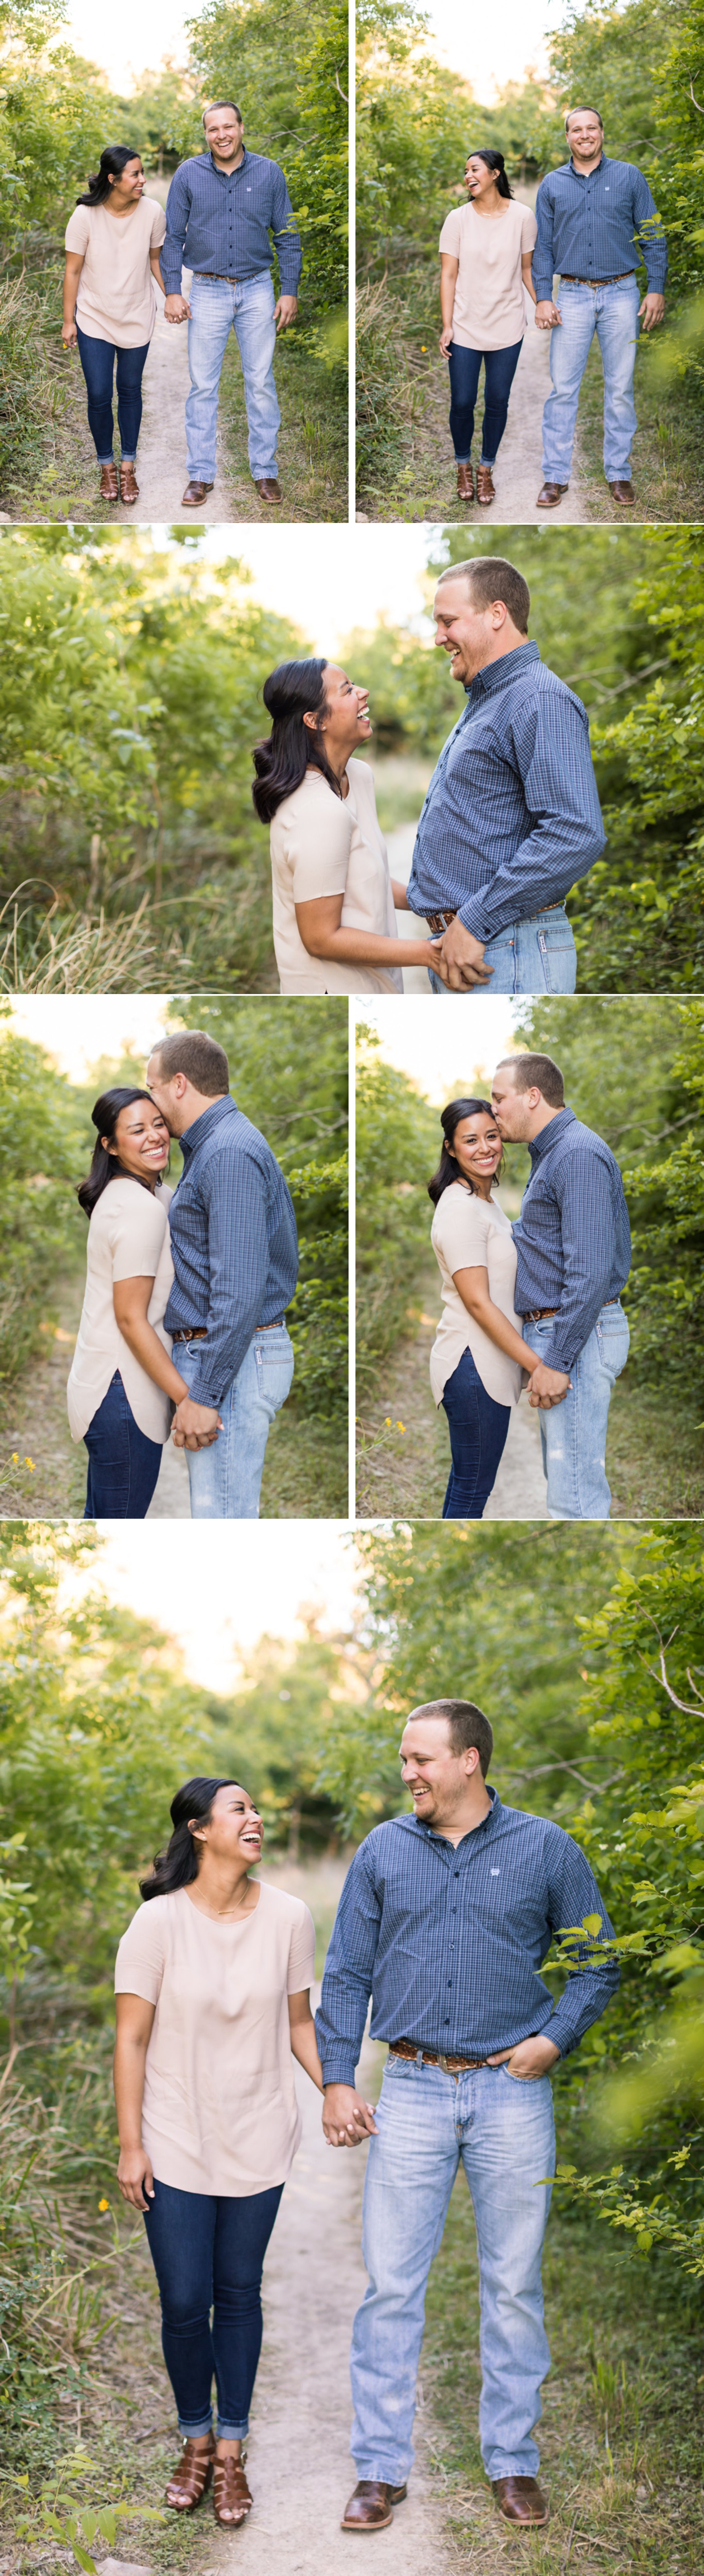 Engagement Session at Cibolo Nature Center in Boerne, TX by Dawn Elizabeth Studios